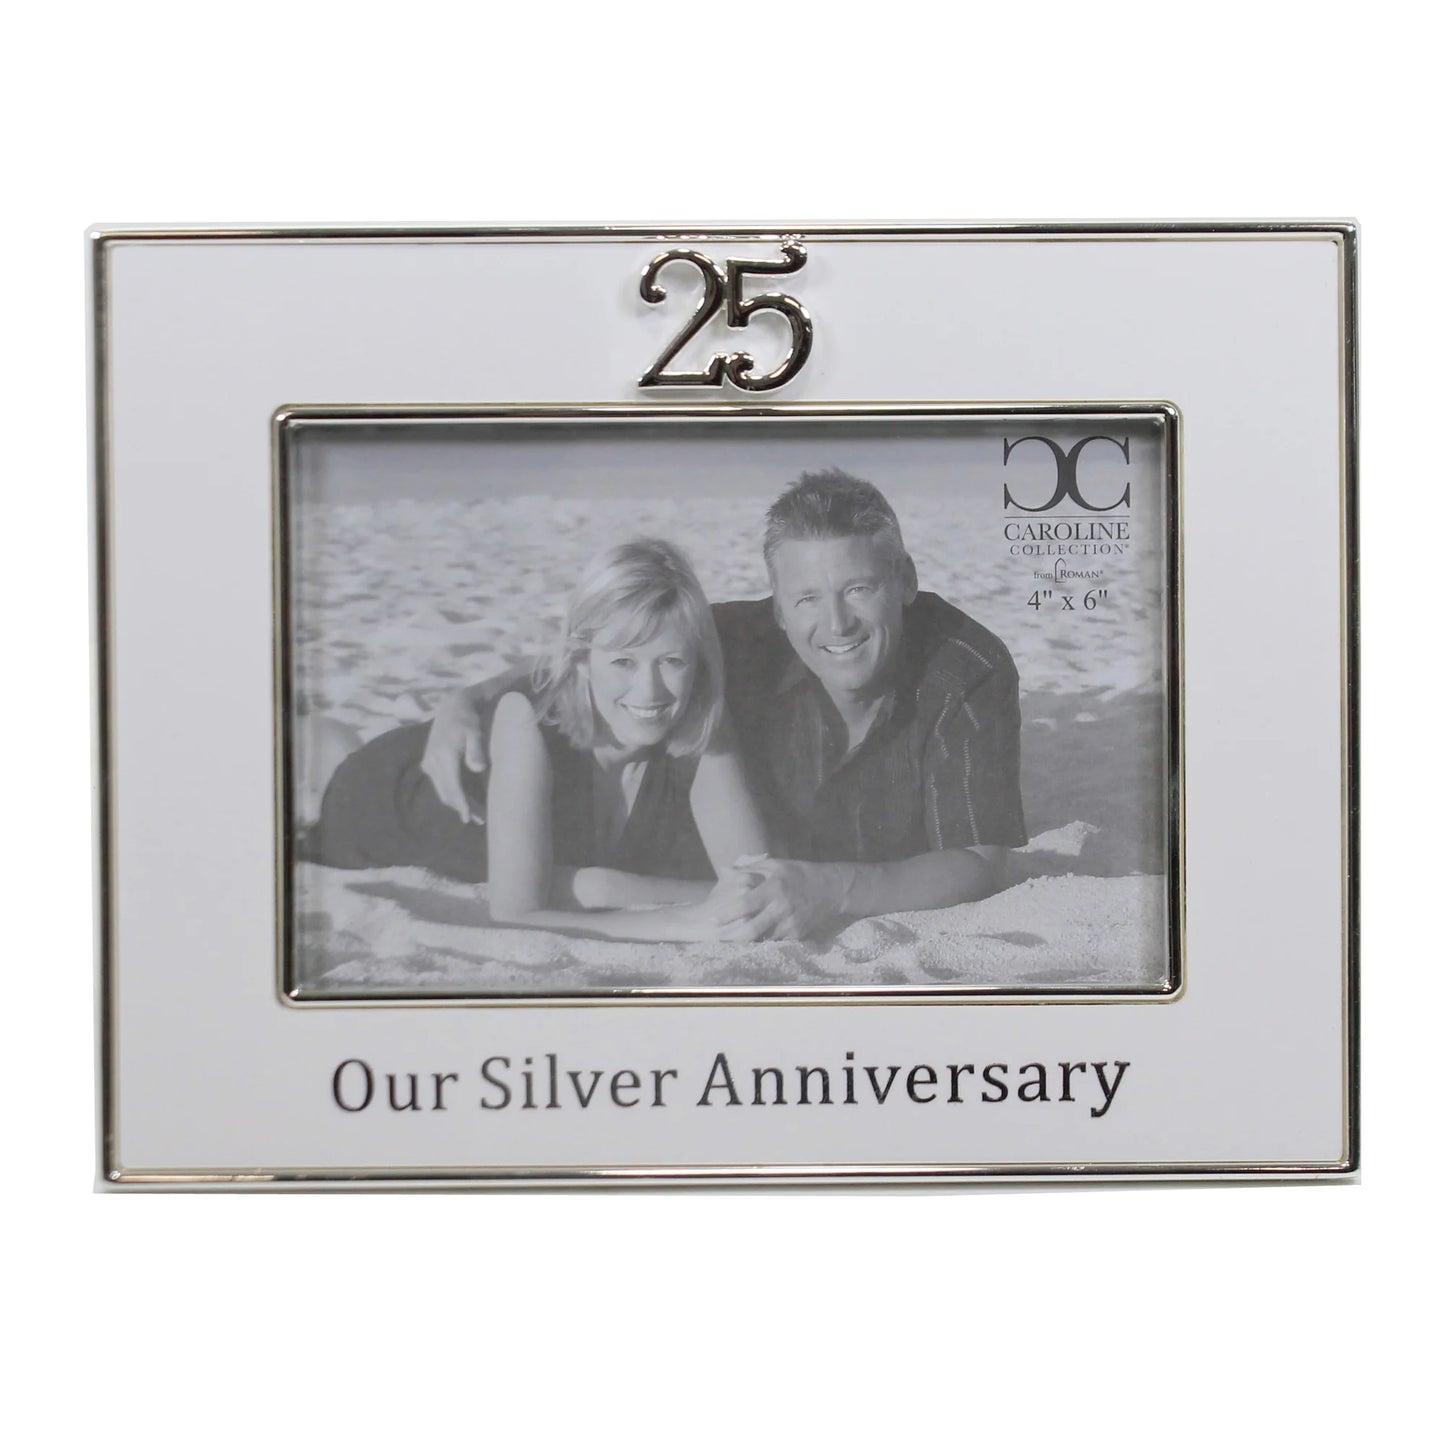 Our Silver Anniversary Frame